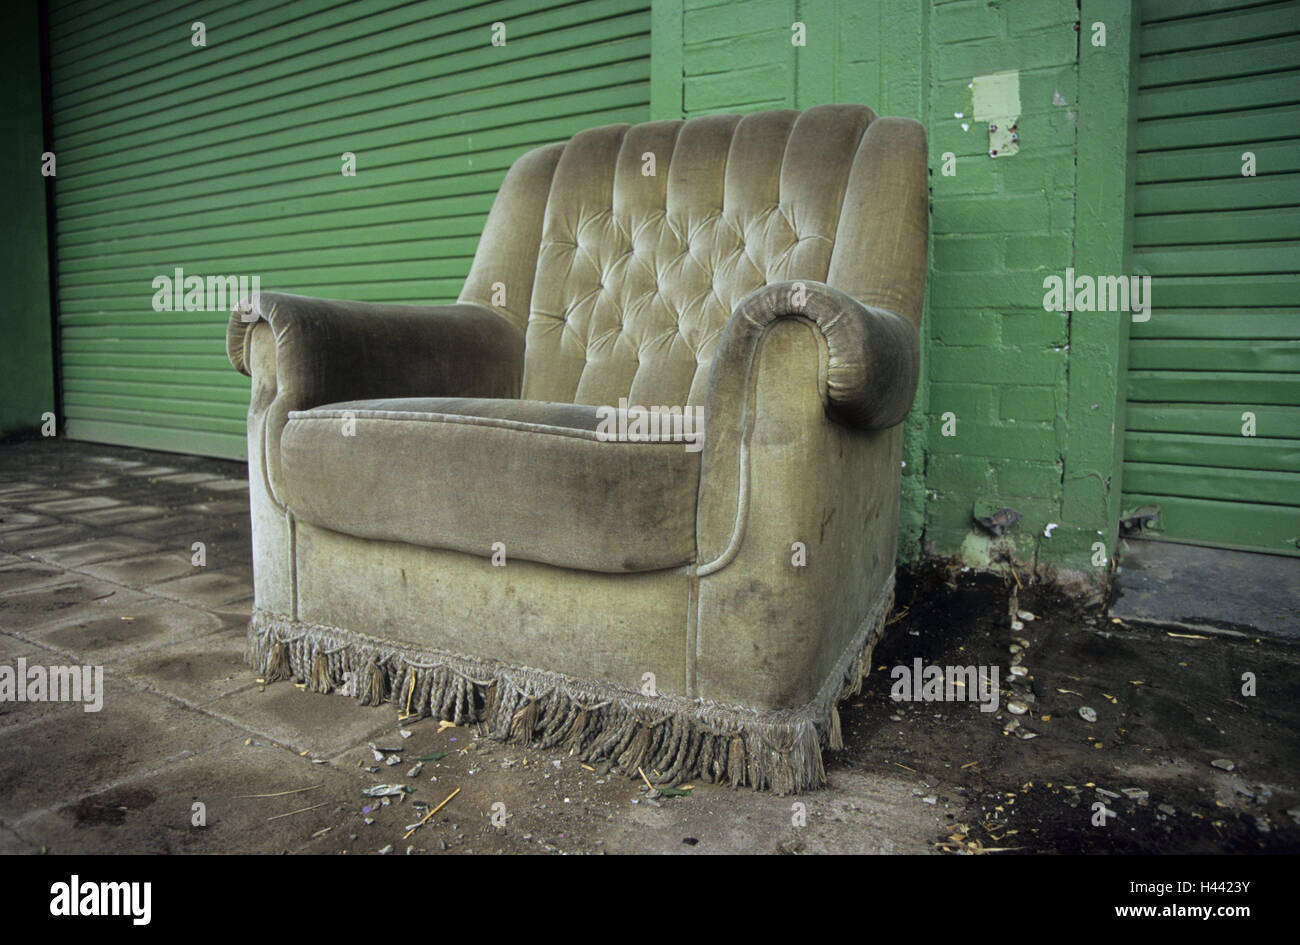 Building, facade, green, upholstered chair, old, chair, seat opportunity, armchair, dirtily, discards, exit neglectedly, dilapidatedly, forget, garbage, bulky refuse, nobody, Stock Photo